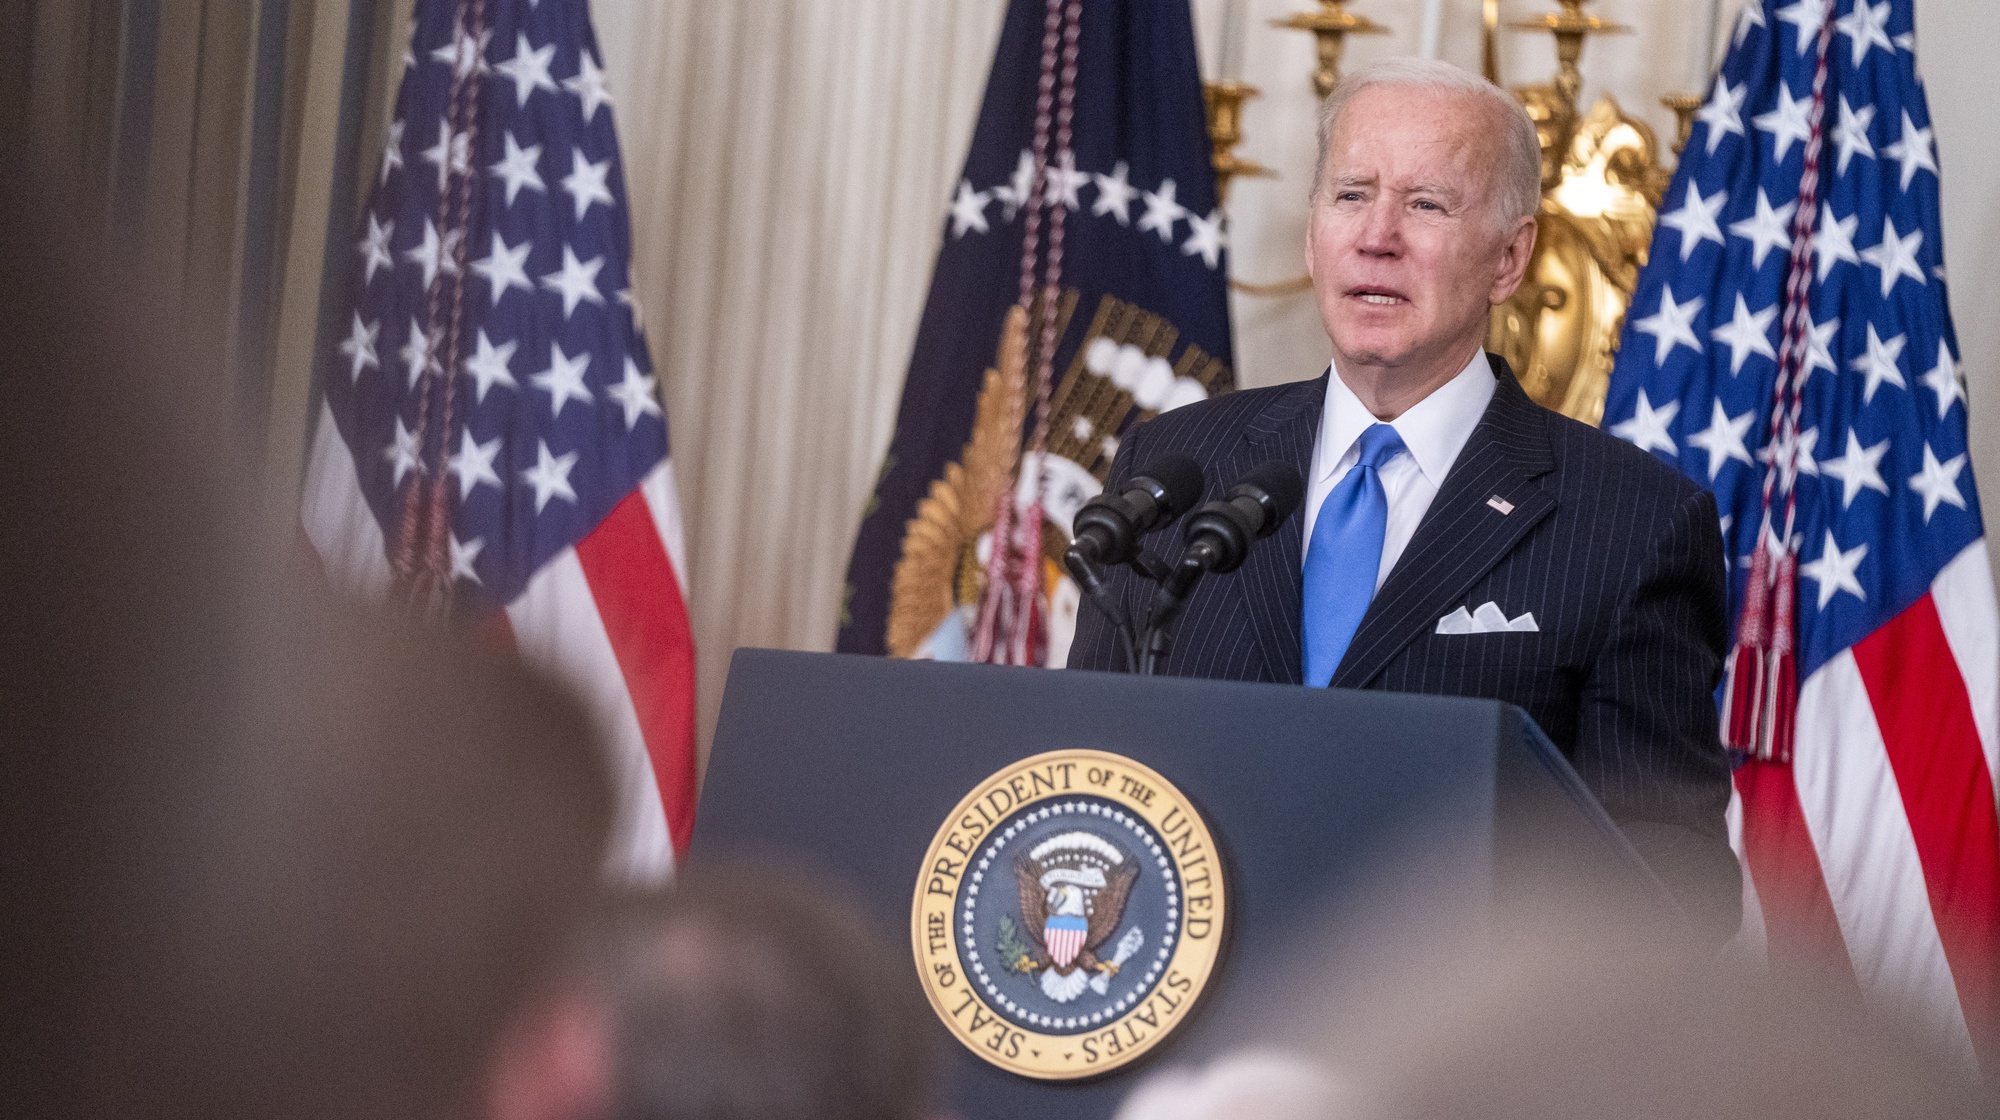 epa09874624 US President Joe Biden delivers remarks during a bill signing ceremony for H.R. 3076, the Postal Service Reform Act of 2022 in the State Dining Room of the White House in Washington, DC, USA, 06 April 2022.  EPA/SHAWN THEW / POOL